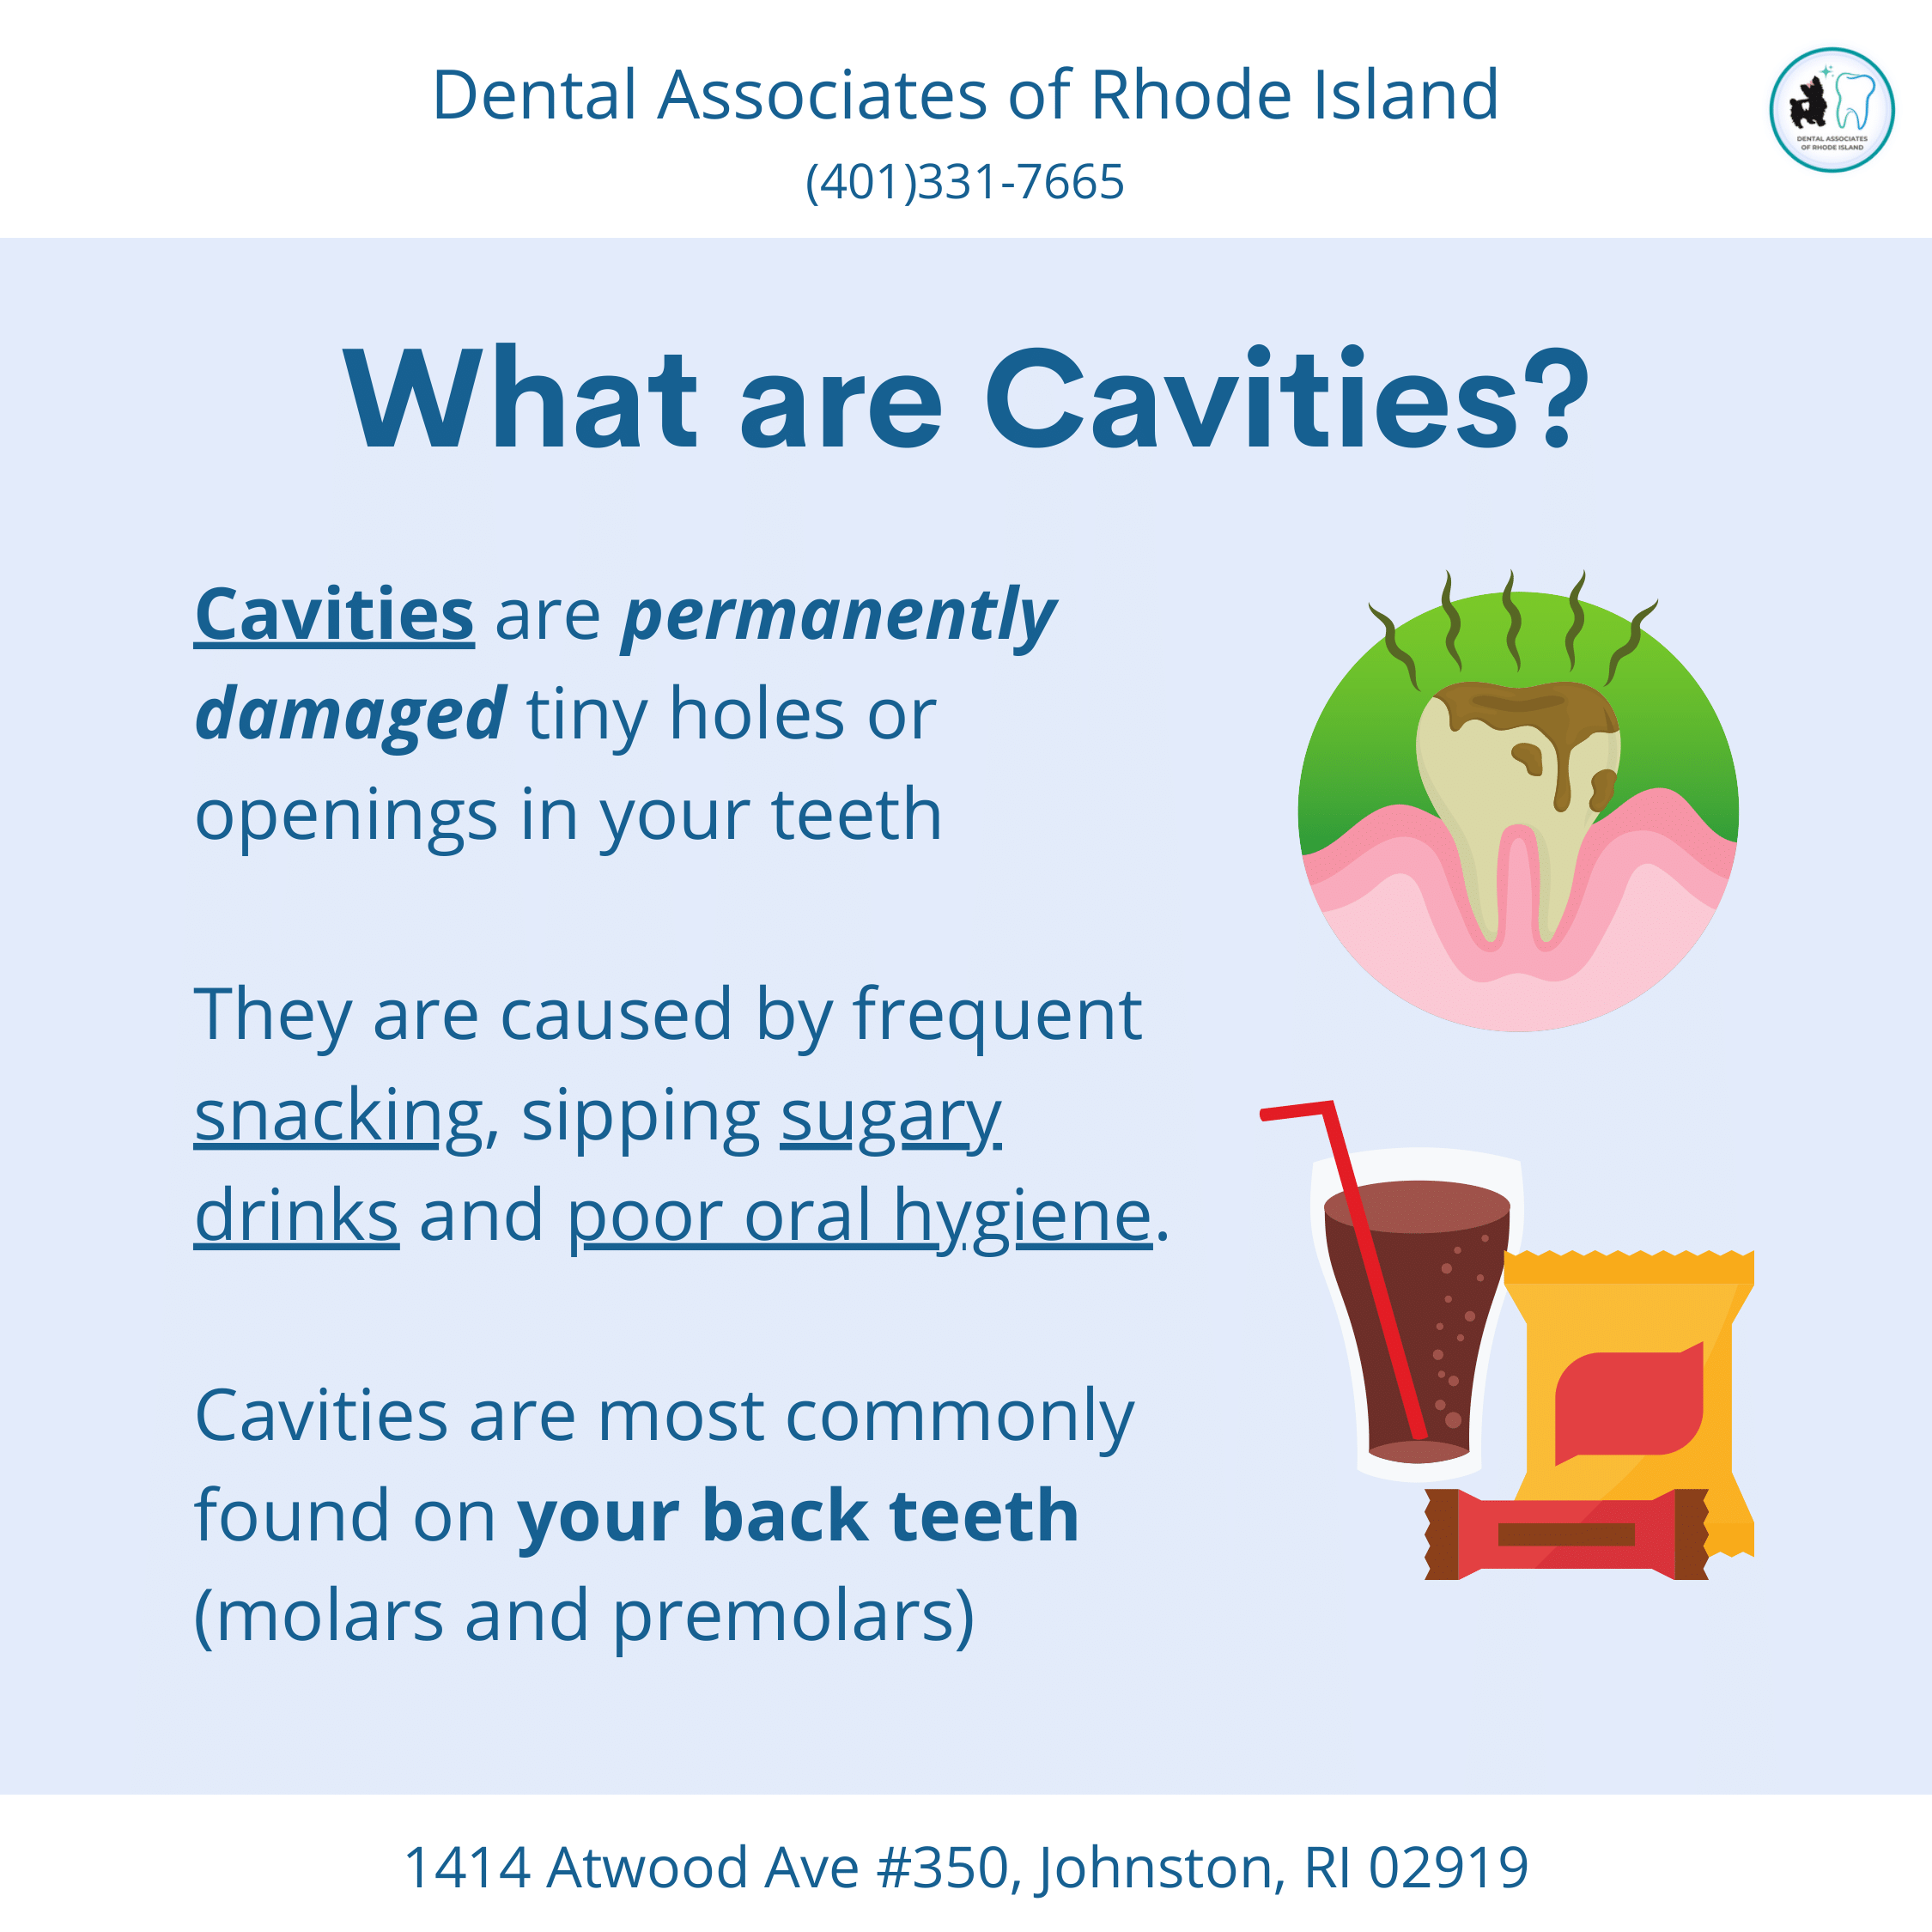 What are Cavities?